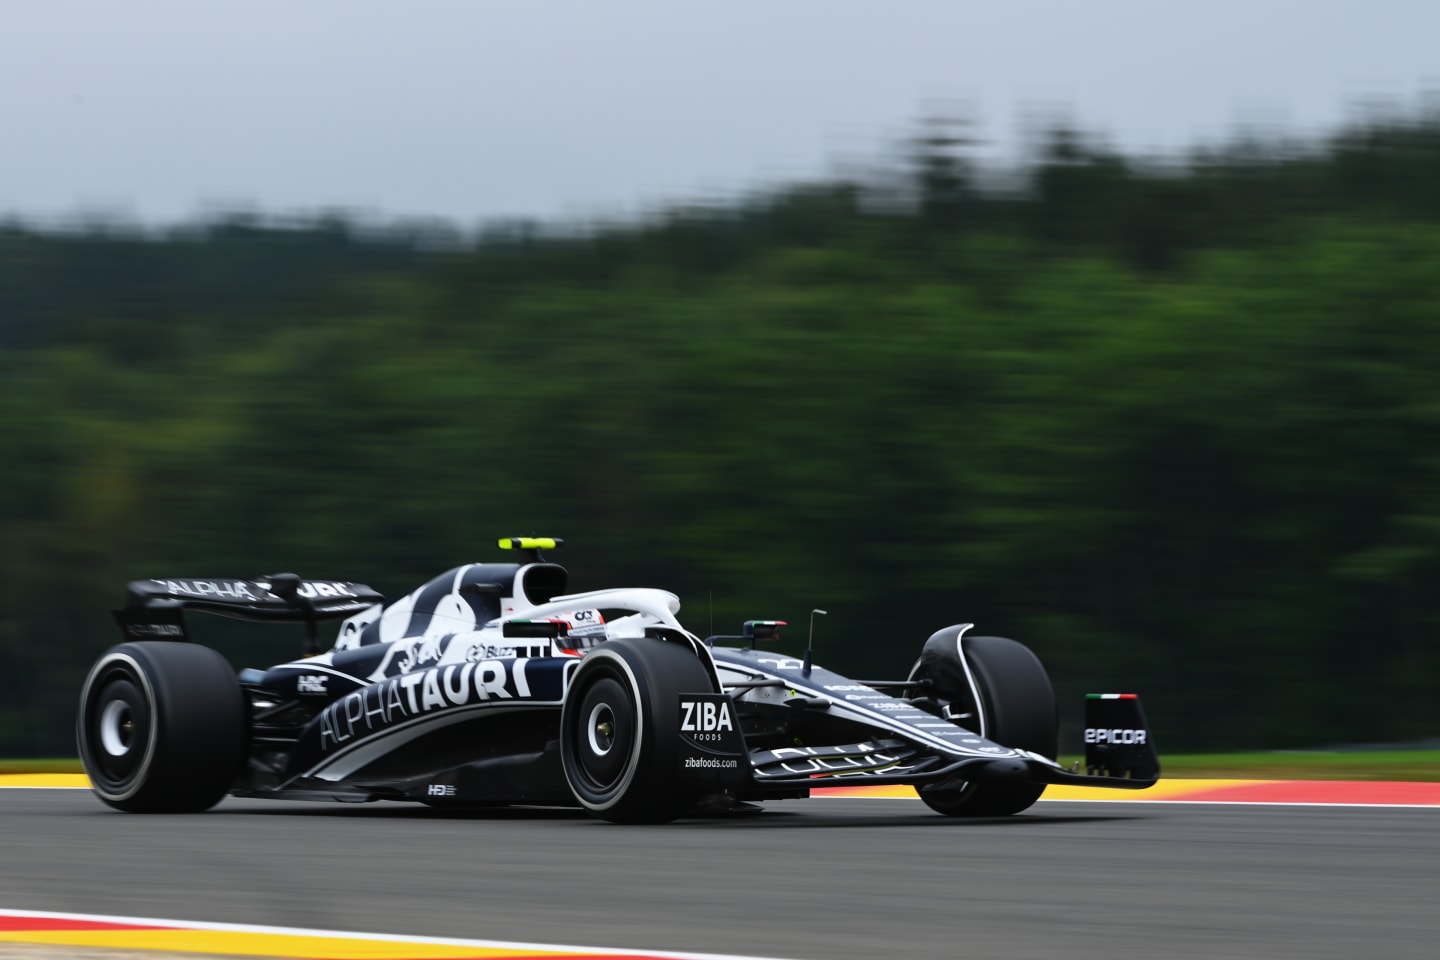 SPA, BELGIUM - AUGUST 26: Yuki Tsunoda of Japan driving the (22) Scuderia AlphaTauri AT03 on track during practice ahead of the F1 Grand Prix of Belgium at Circuit de Spa-Francorchamps on August 26, 2022 in Spa, Belgium. (Photo by Dan Mullan/Getty Images)